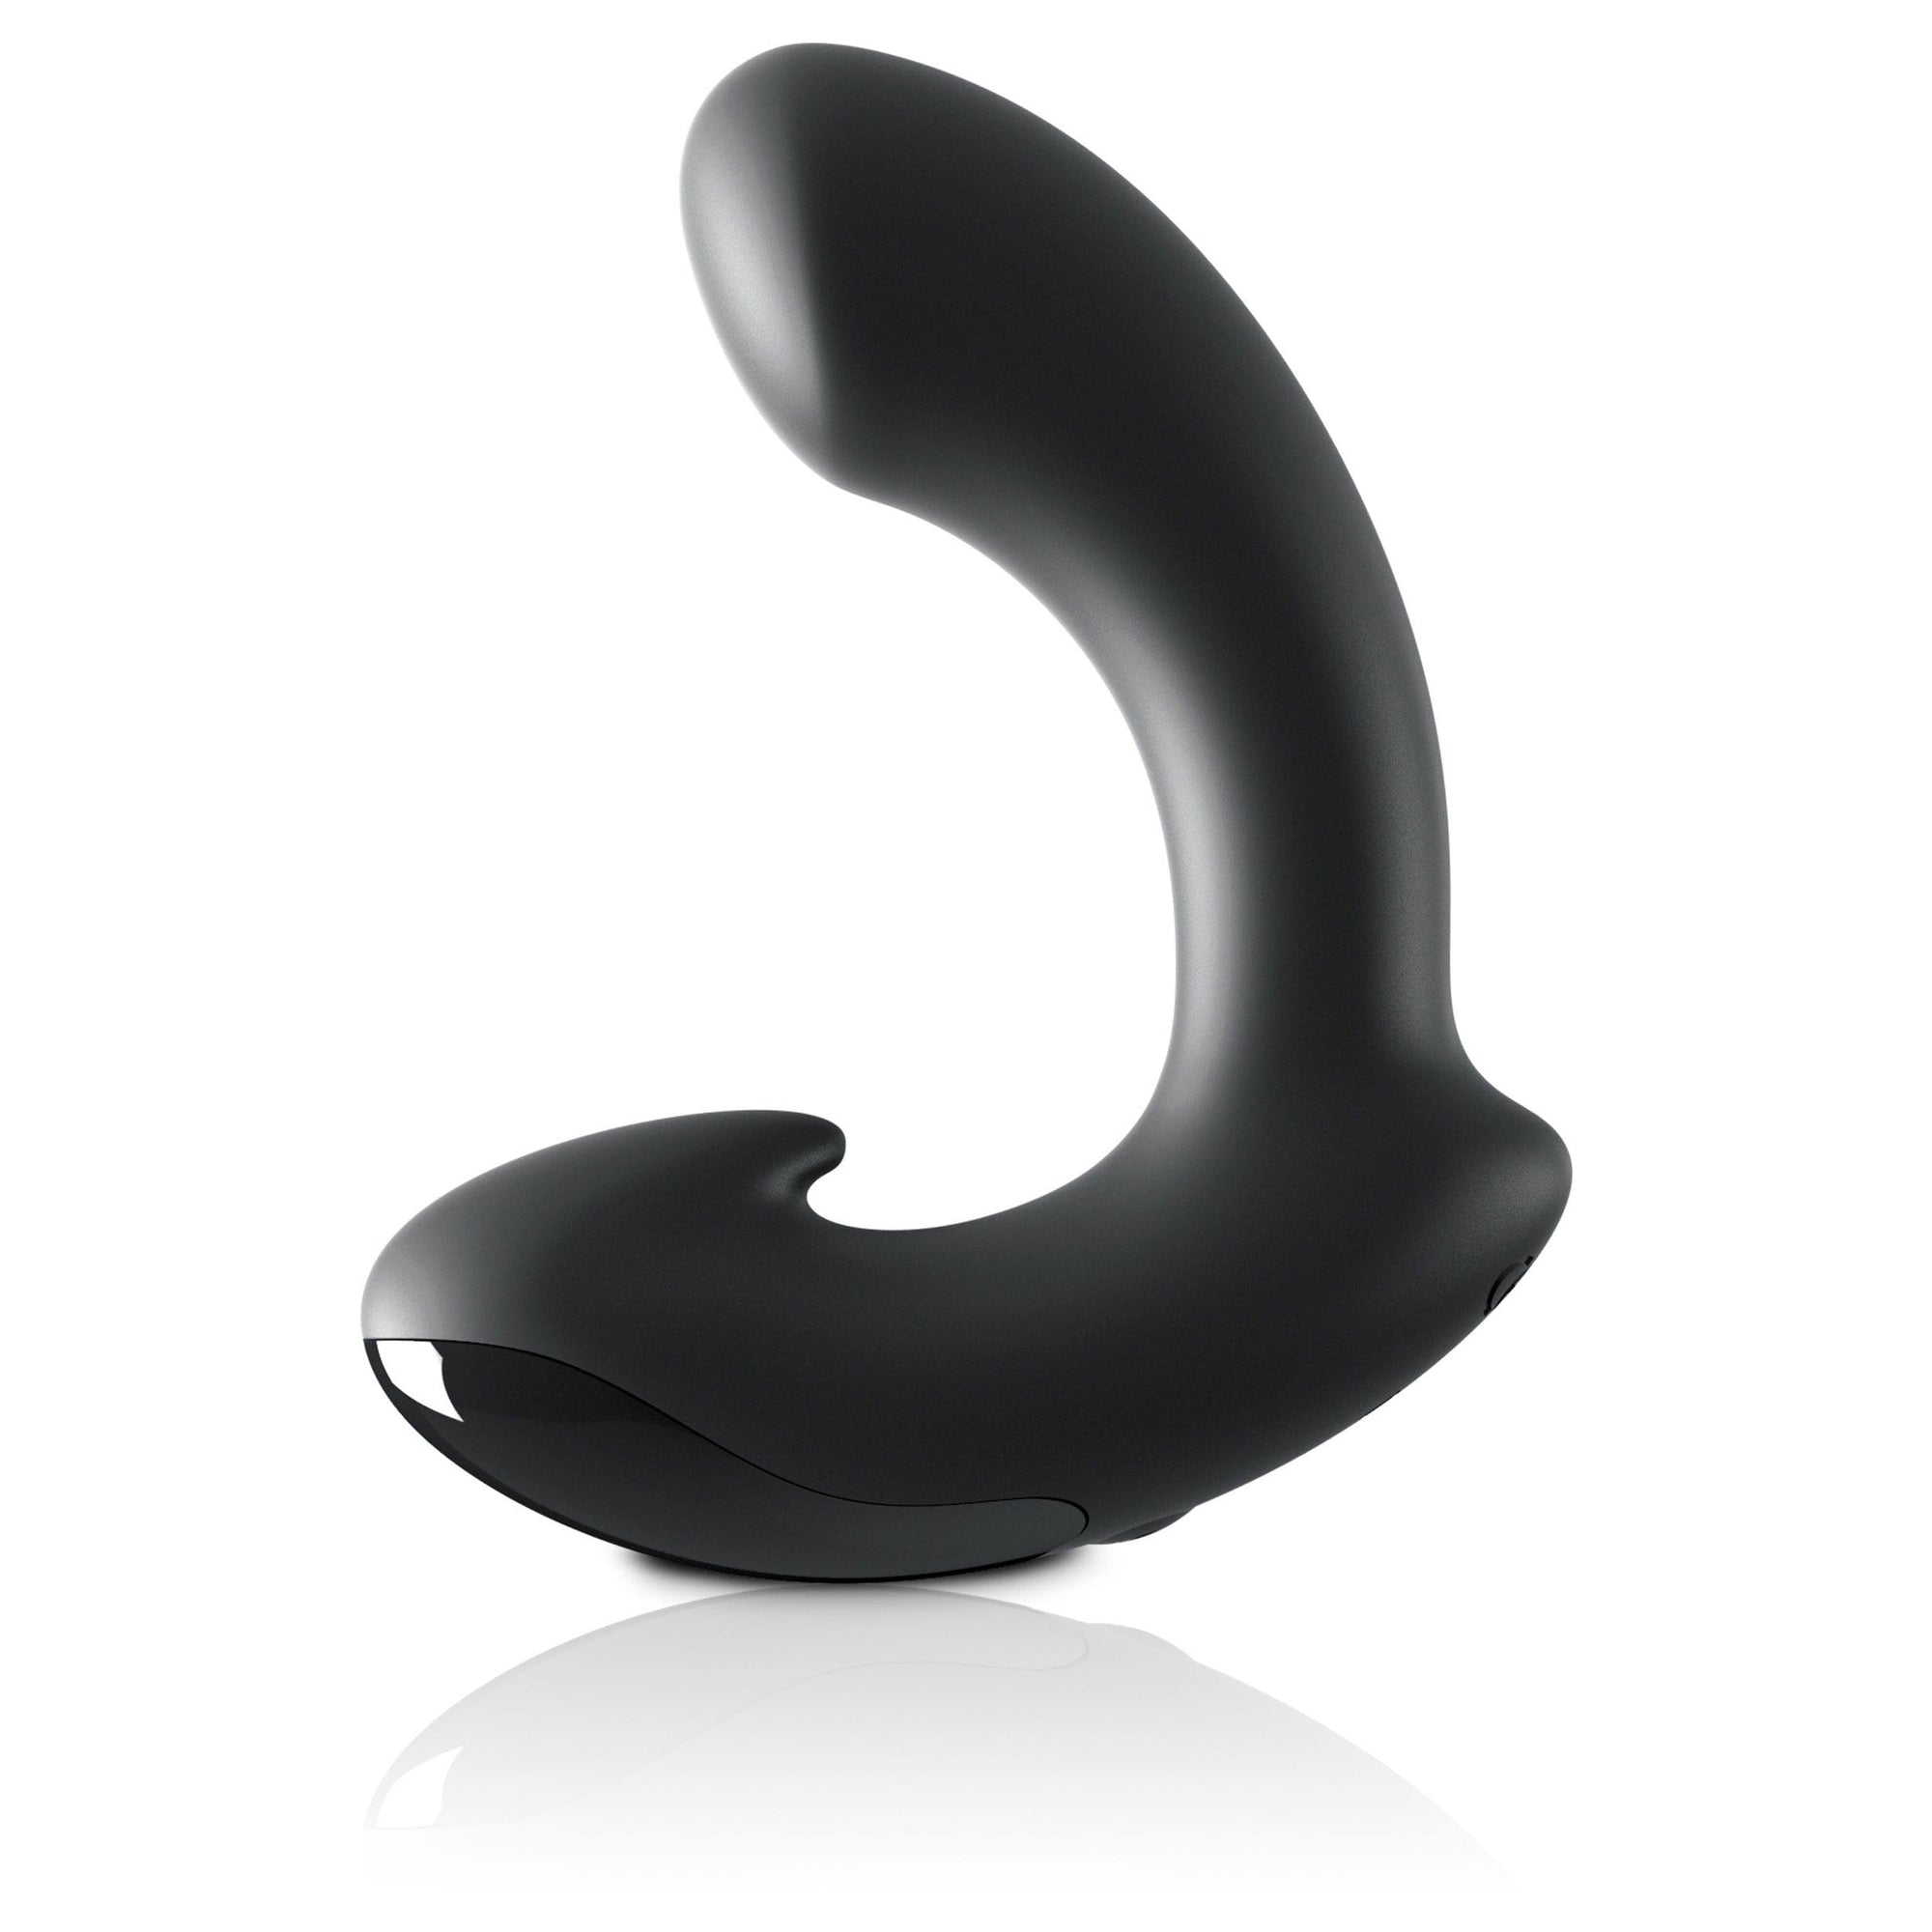 Sir Richards - Control Silicone P-Spot Massager (Black) Prostate Massager (Vibration) Rechargeable 319985408 CherryAffairs